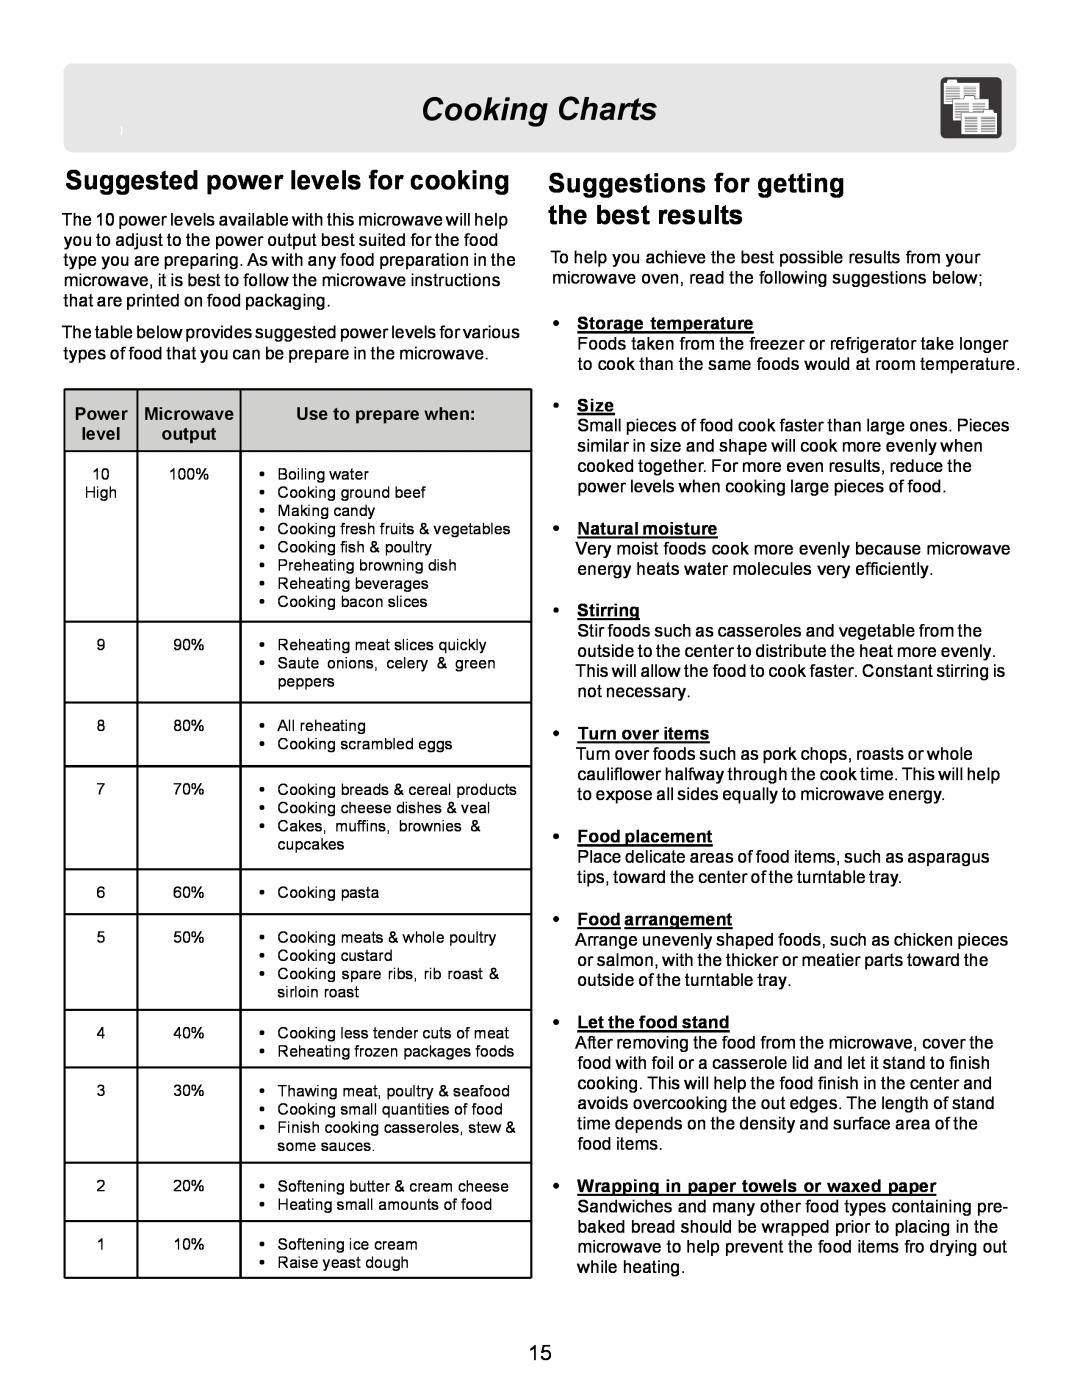 Frigidaire FFCE1439LW manual Suggested power levels for cooking, Suggestions for getting the best results, Power, Microwave 